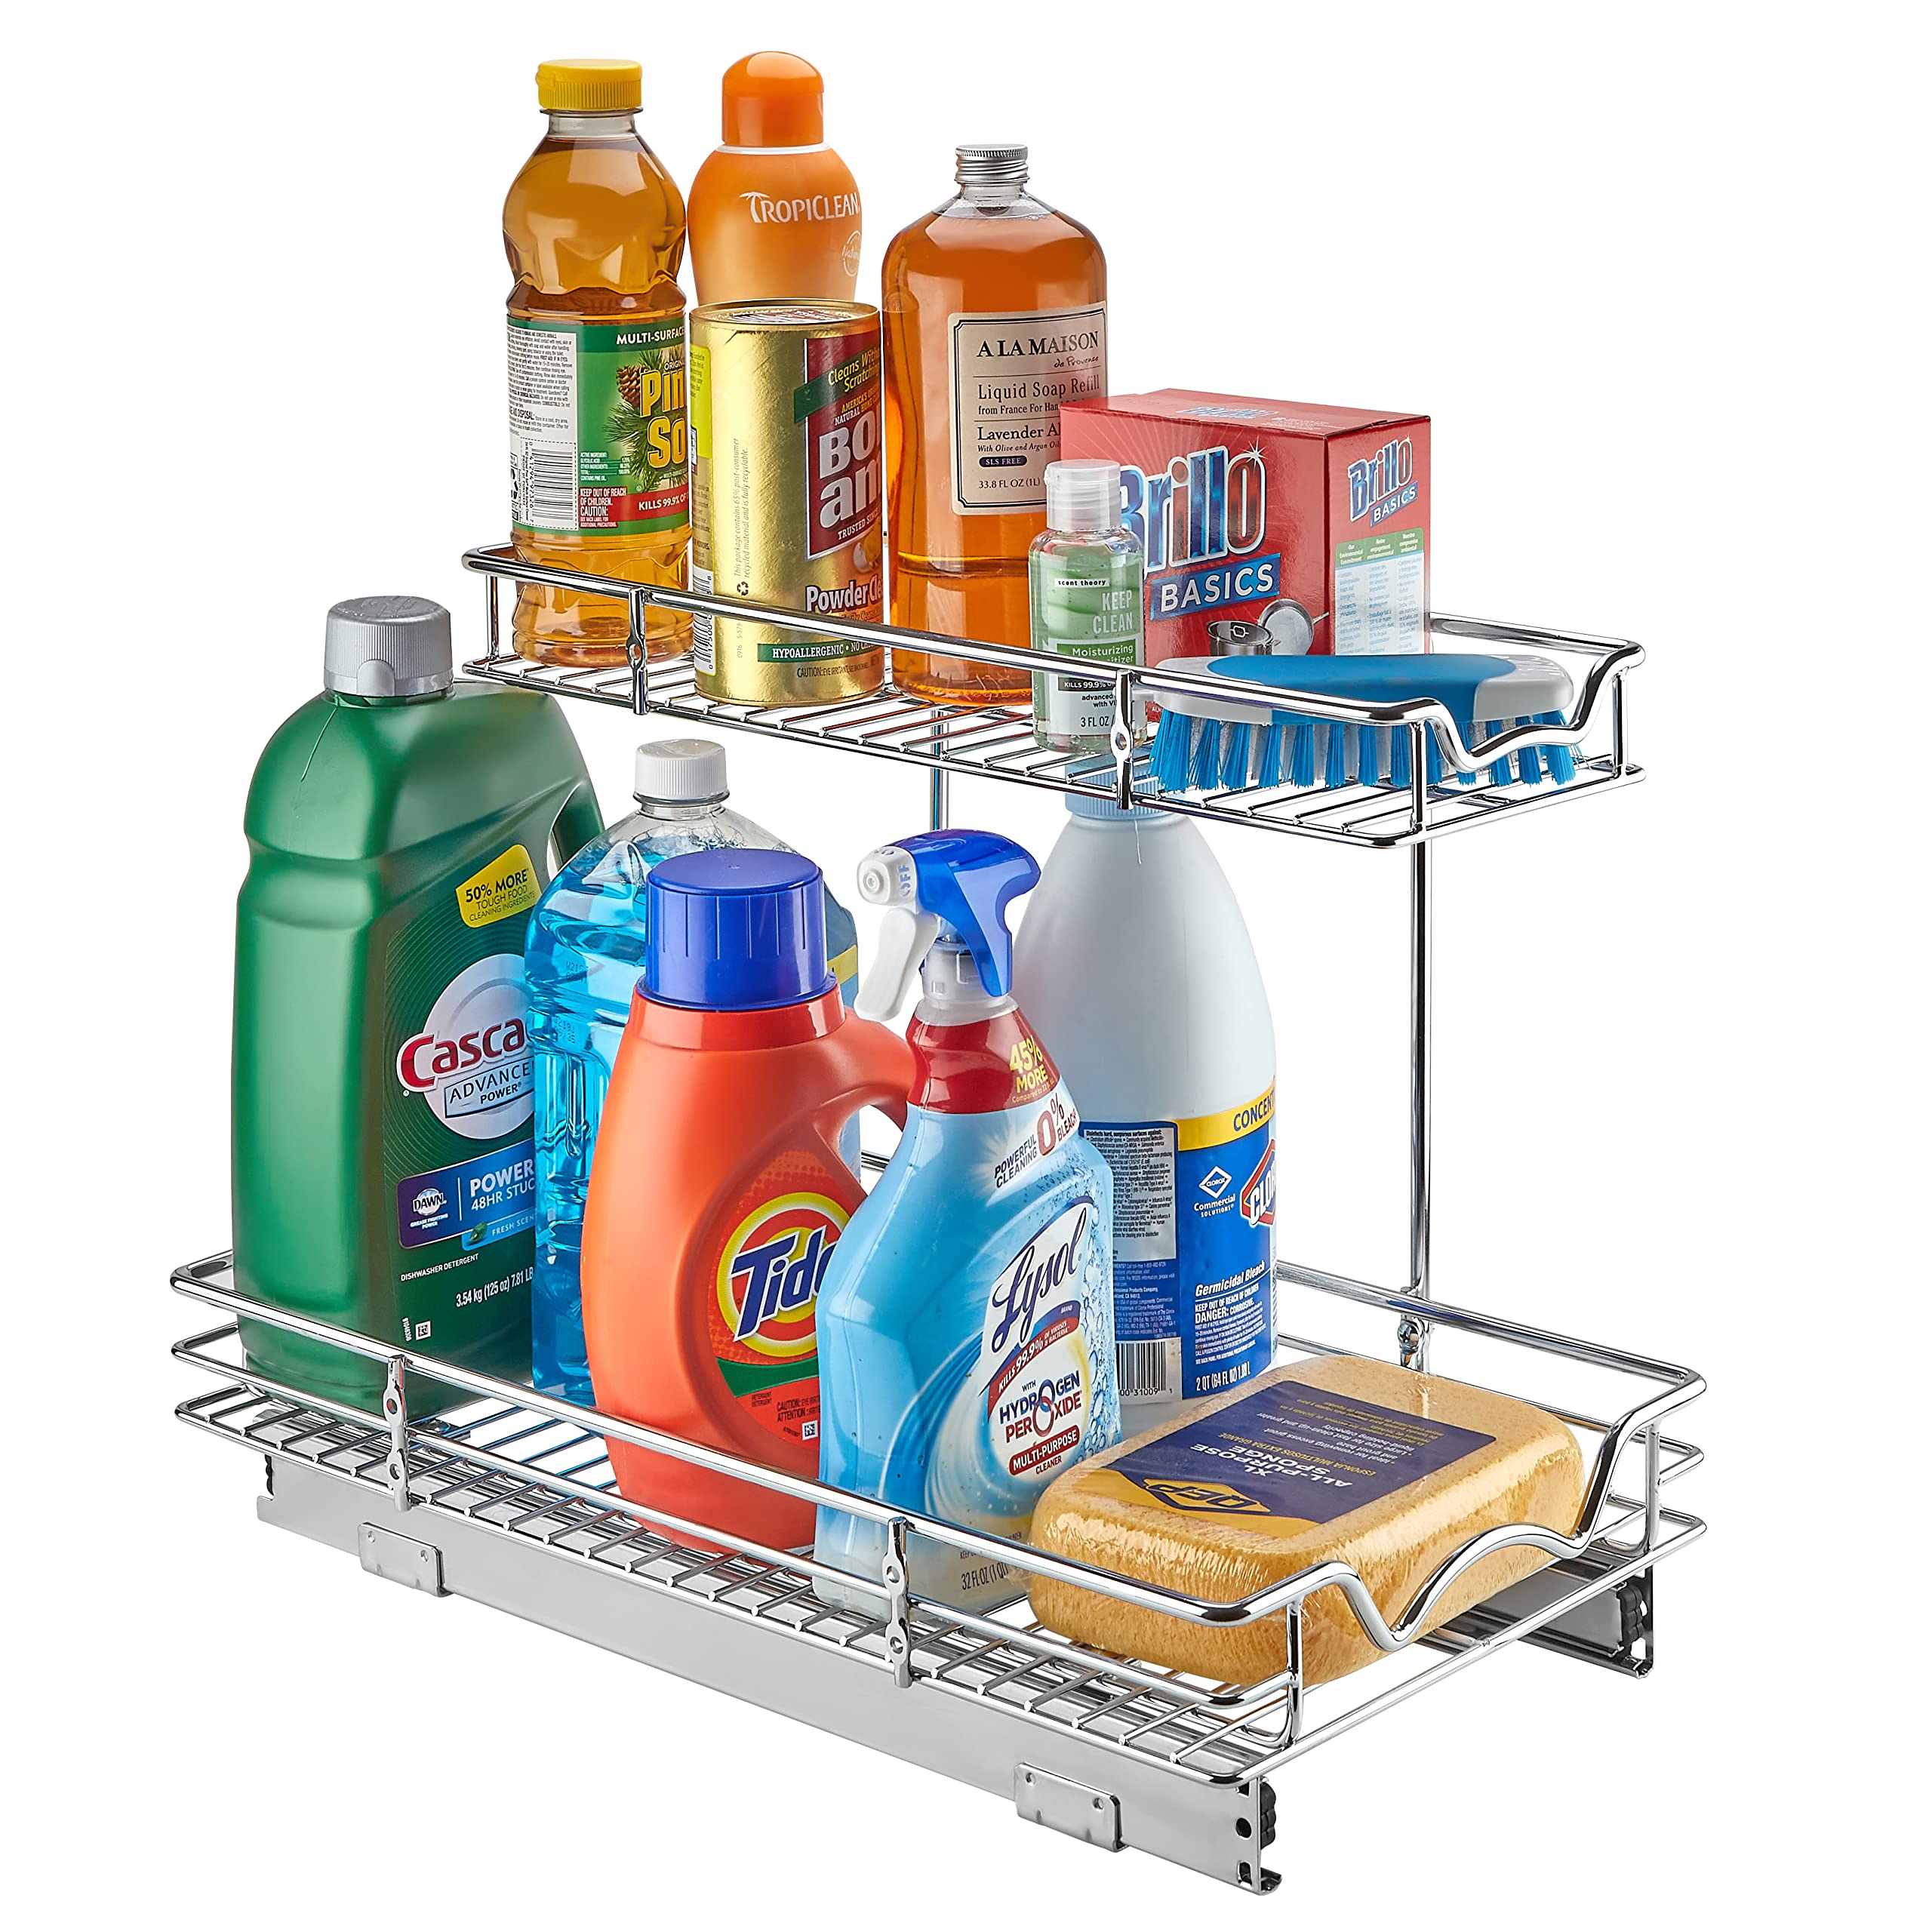 Hold N’ Storage Under Sink Organizers and Storage - 2 Tier slide out Cabinet Organizer With Sliding Drawers For Inside Cabinets Chrome